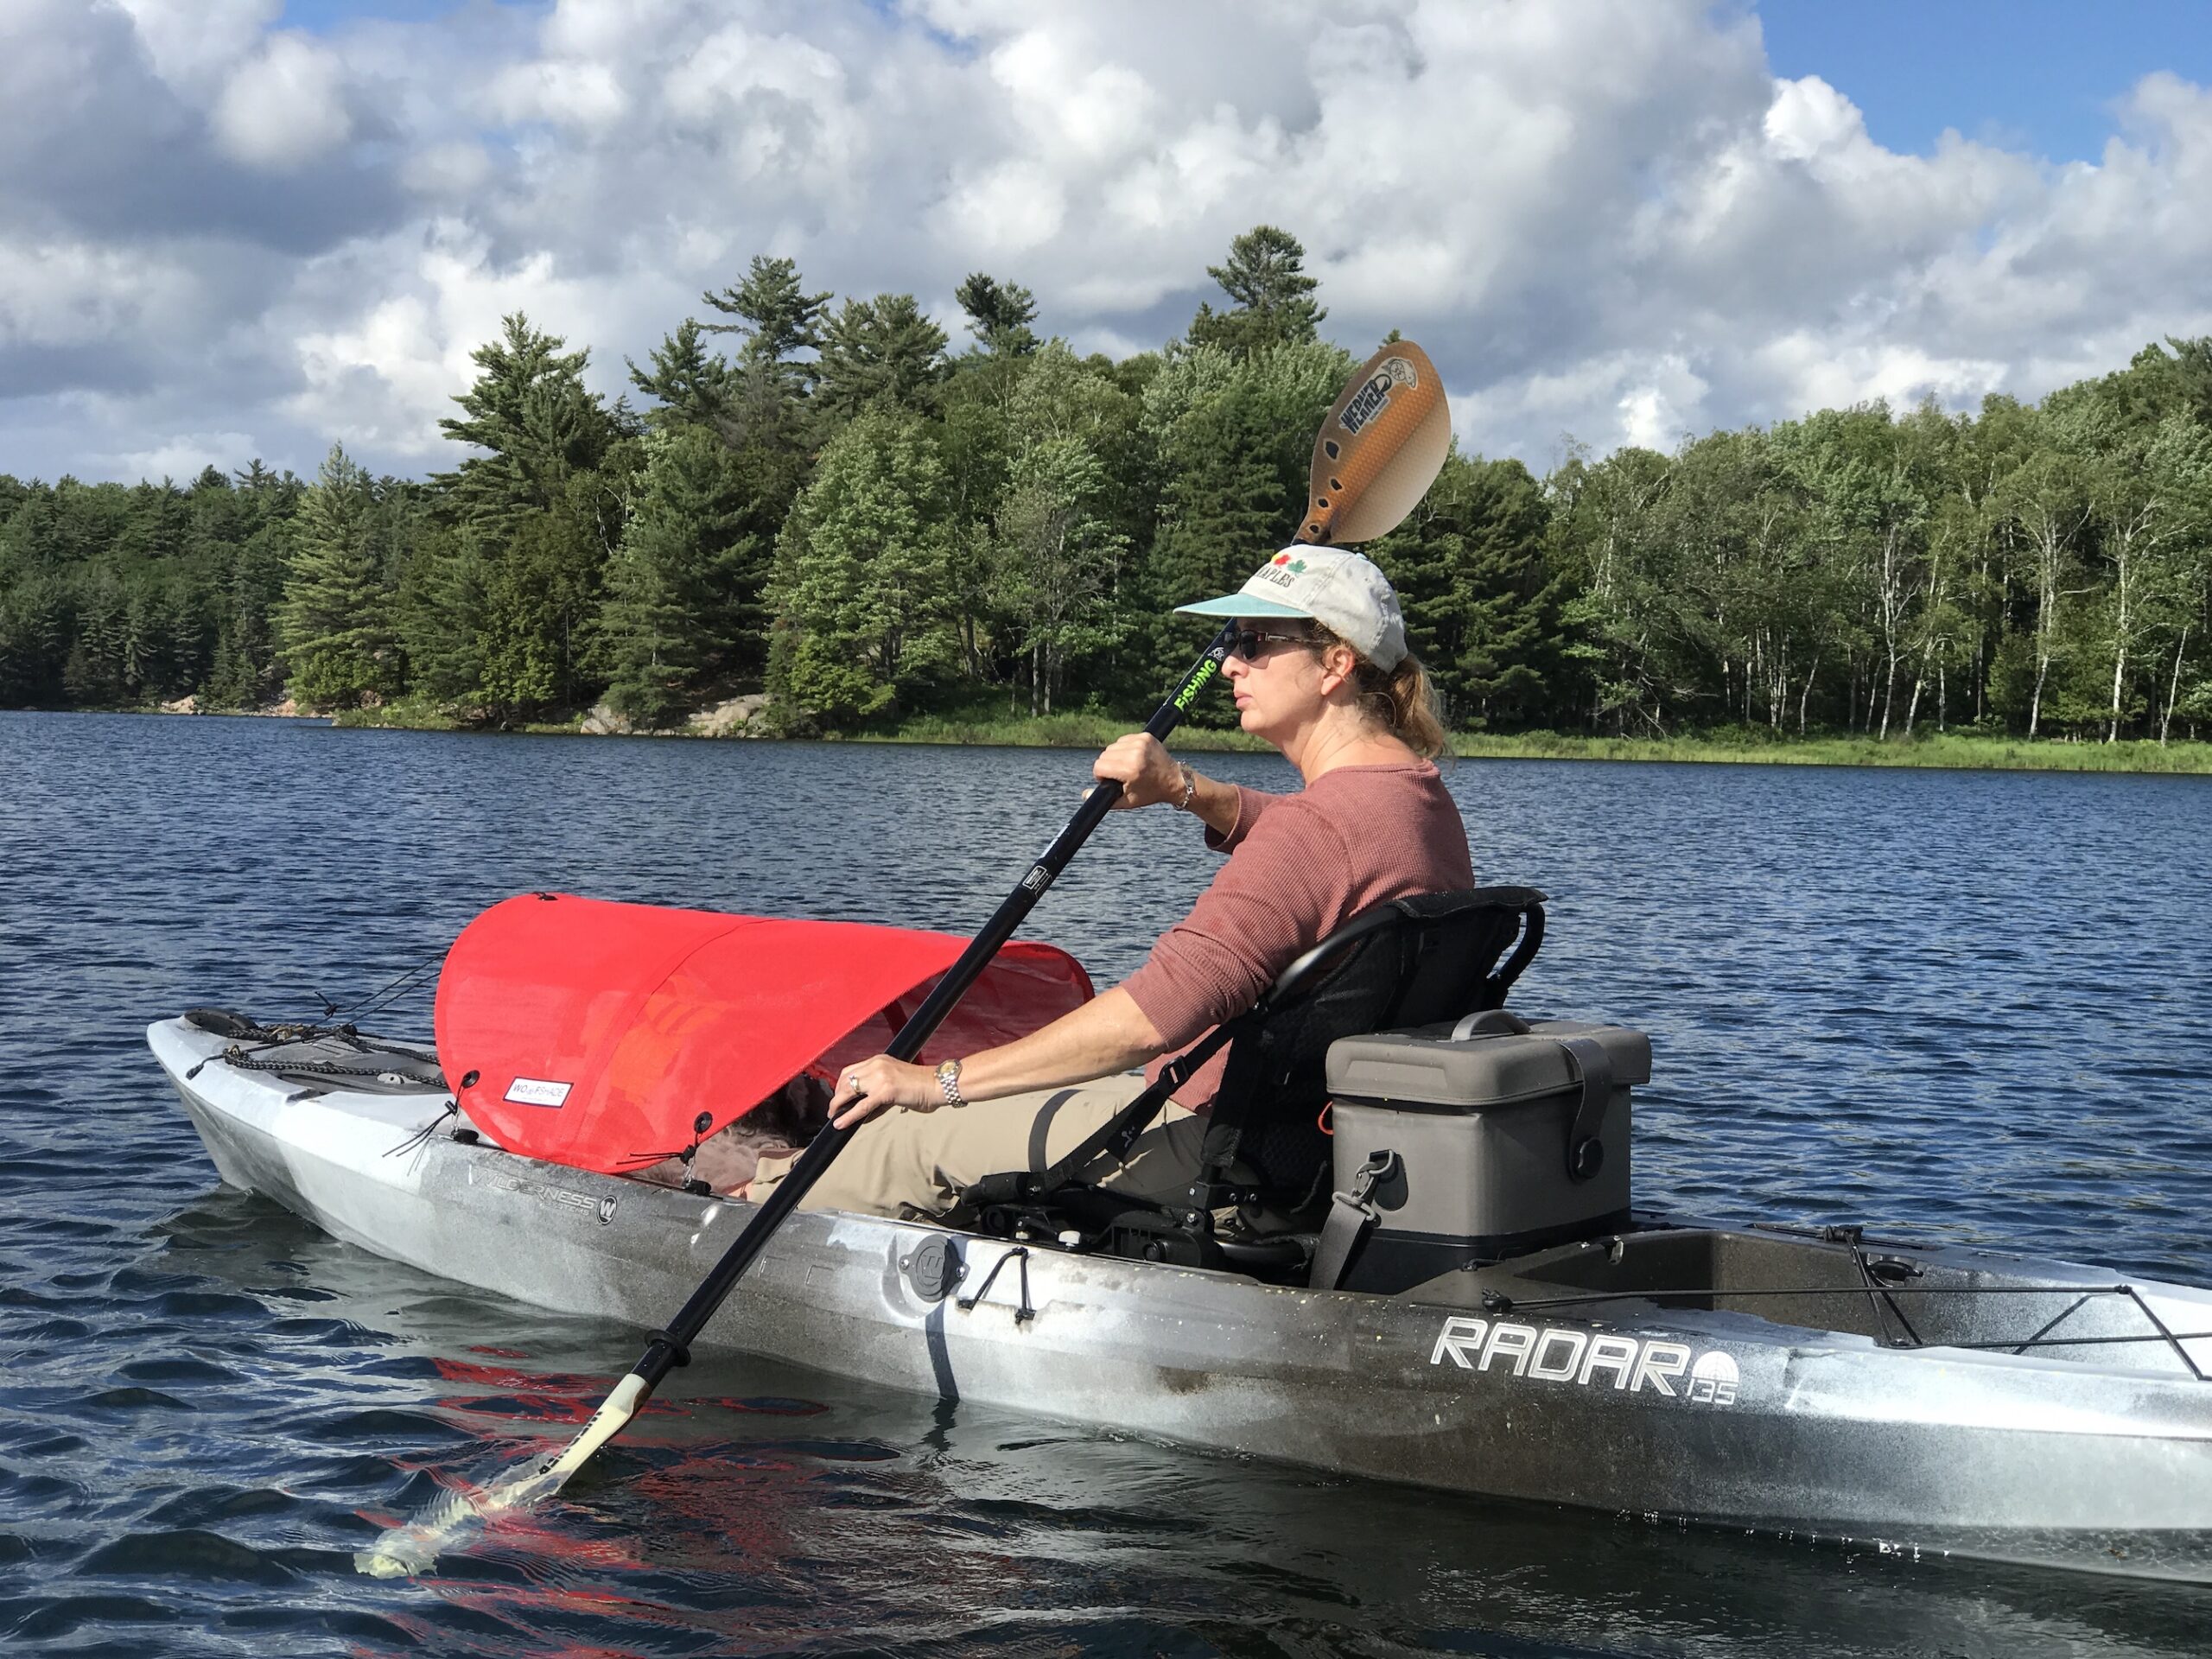 How to Mount Umbrella on Kayak for Shade while Fishing to Stay